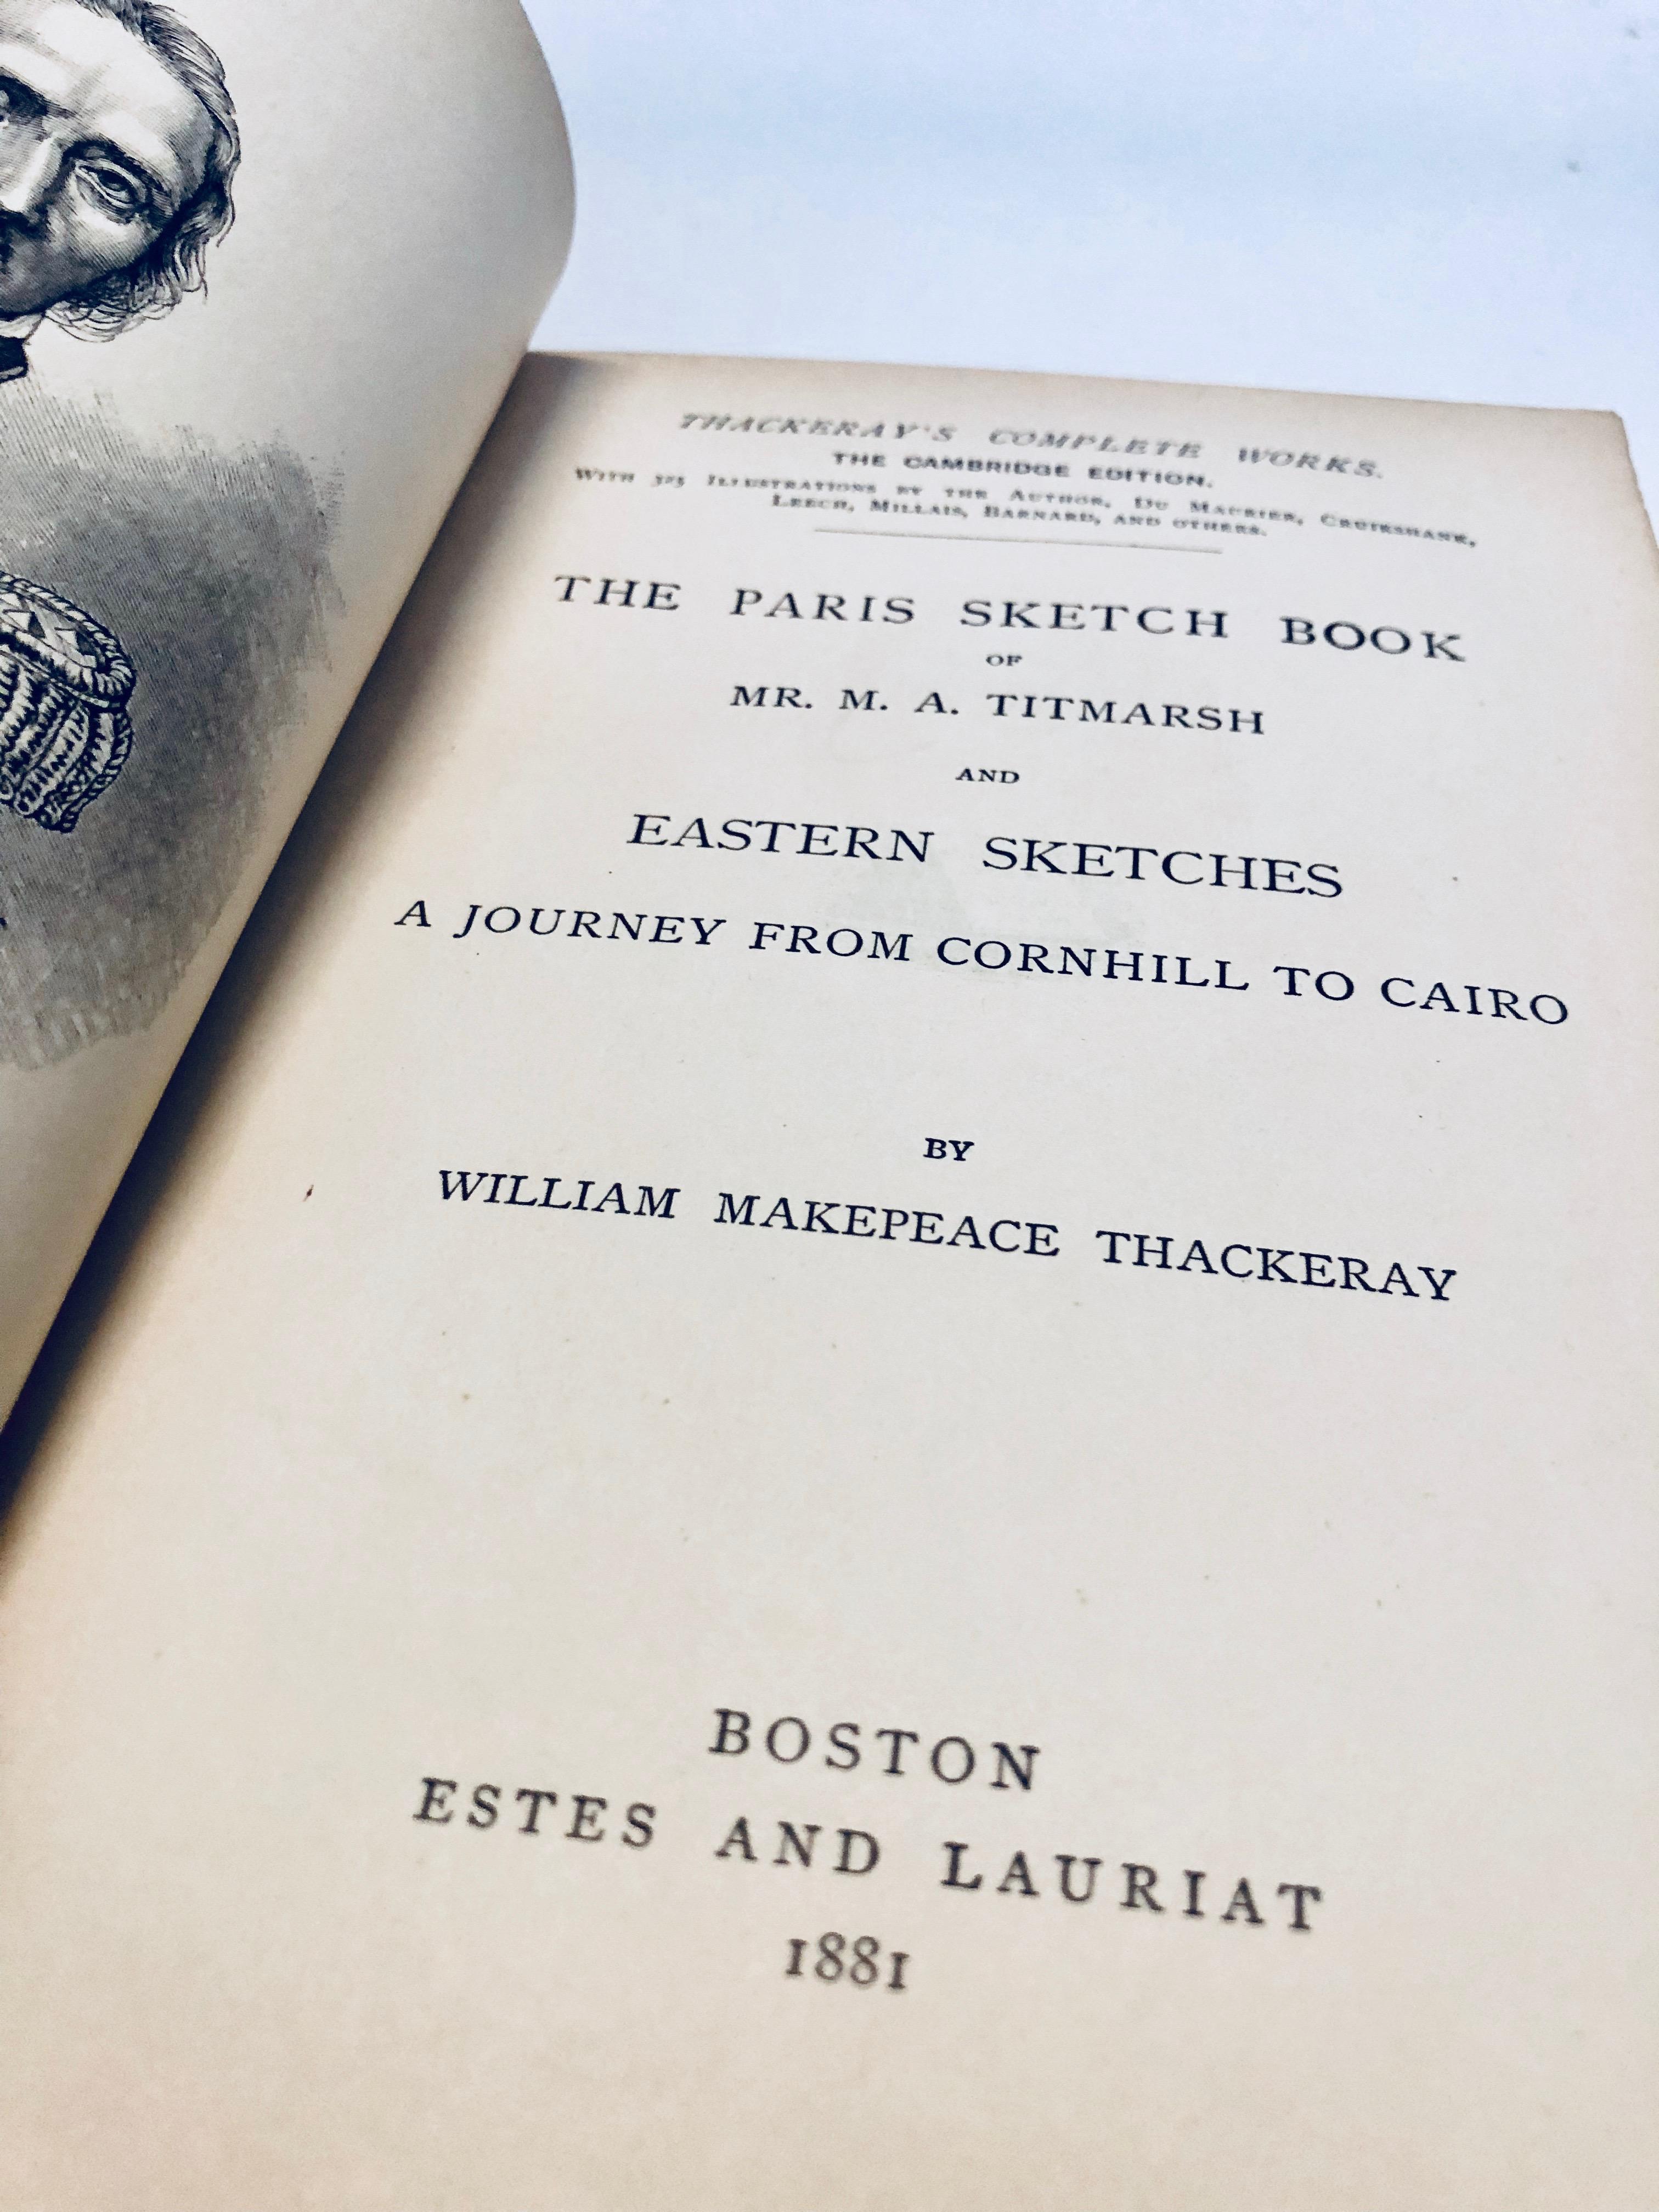 Eastern Sketches: A Journey from Cornhill to Cairo (1881) by William Makepeace Thackeray